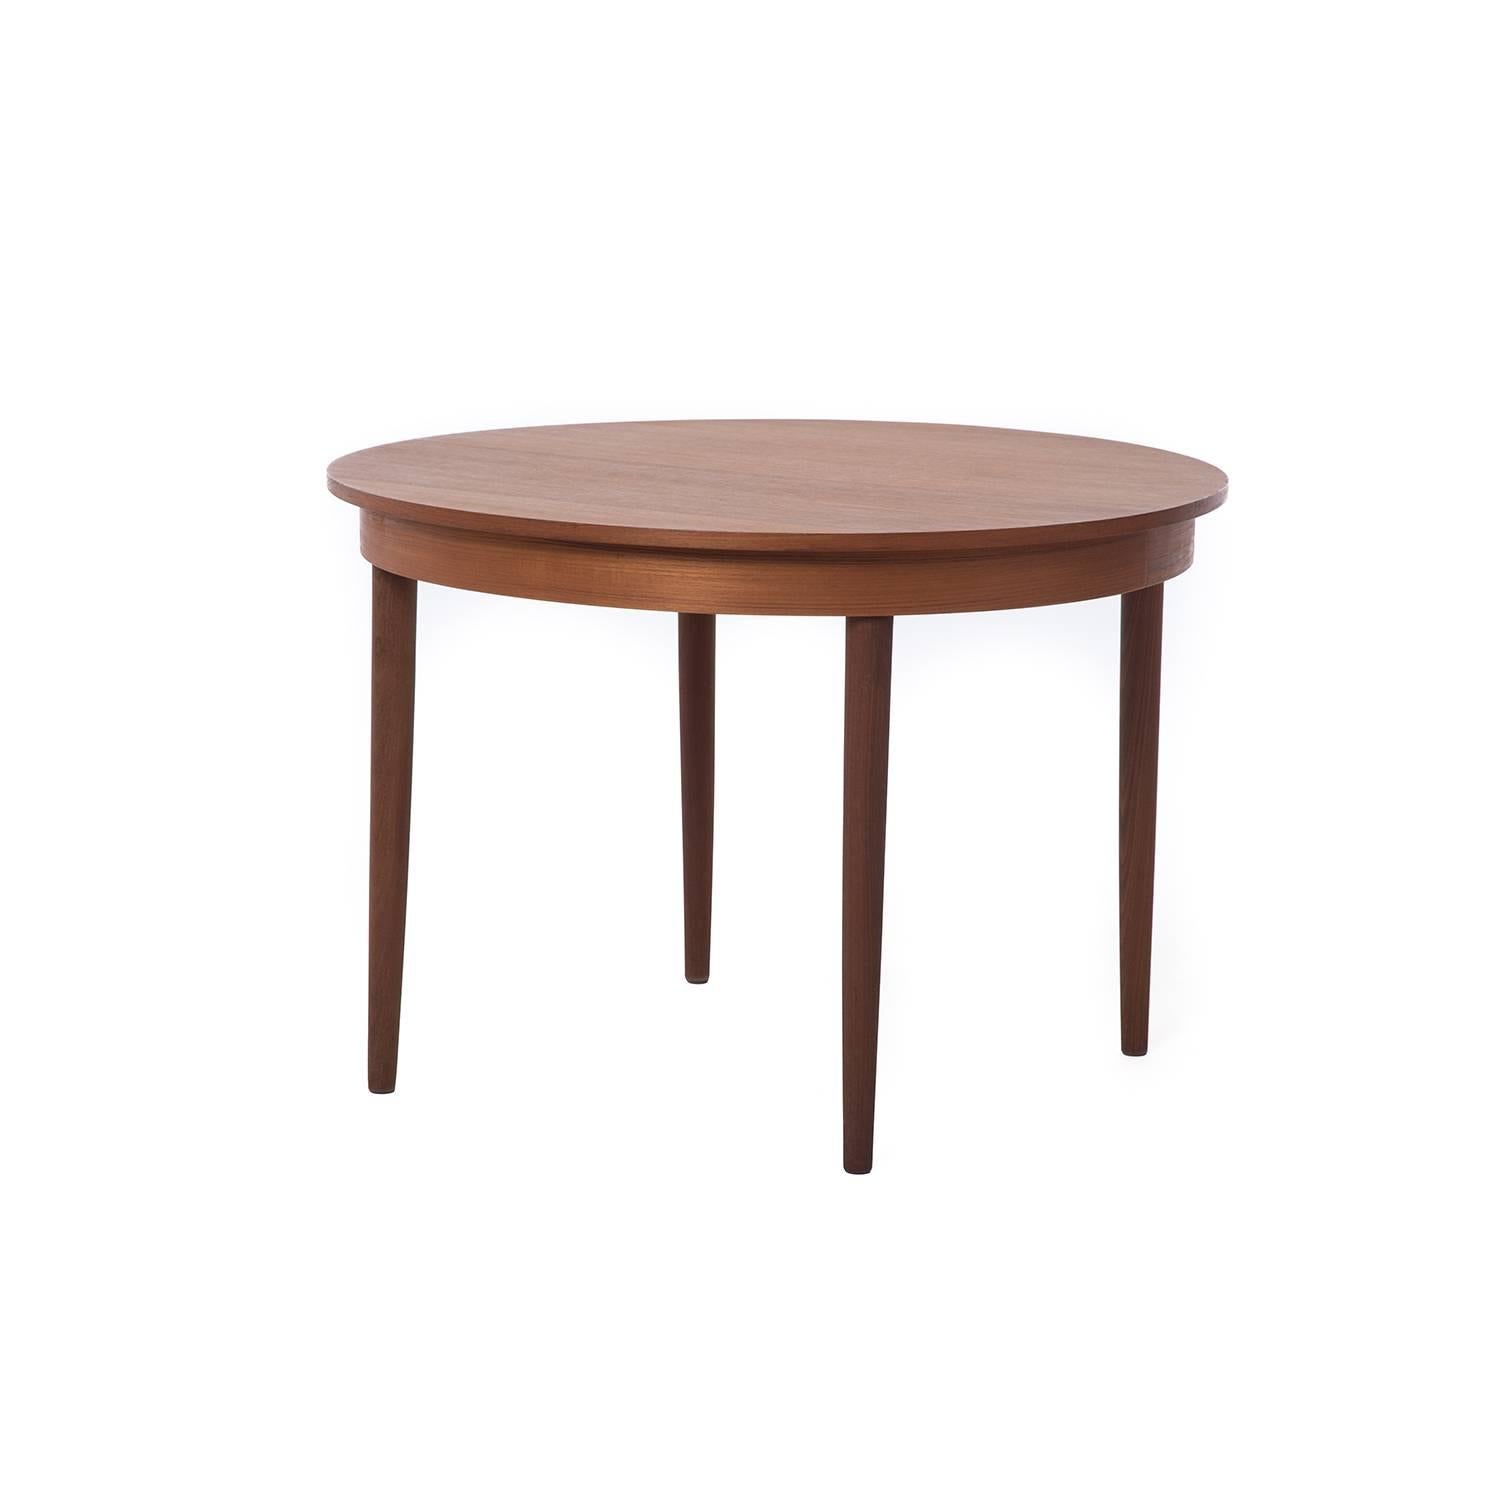 Circular teak dinette table perfect for an eat in kitchen or small dining space.